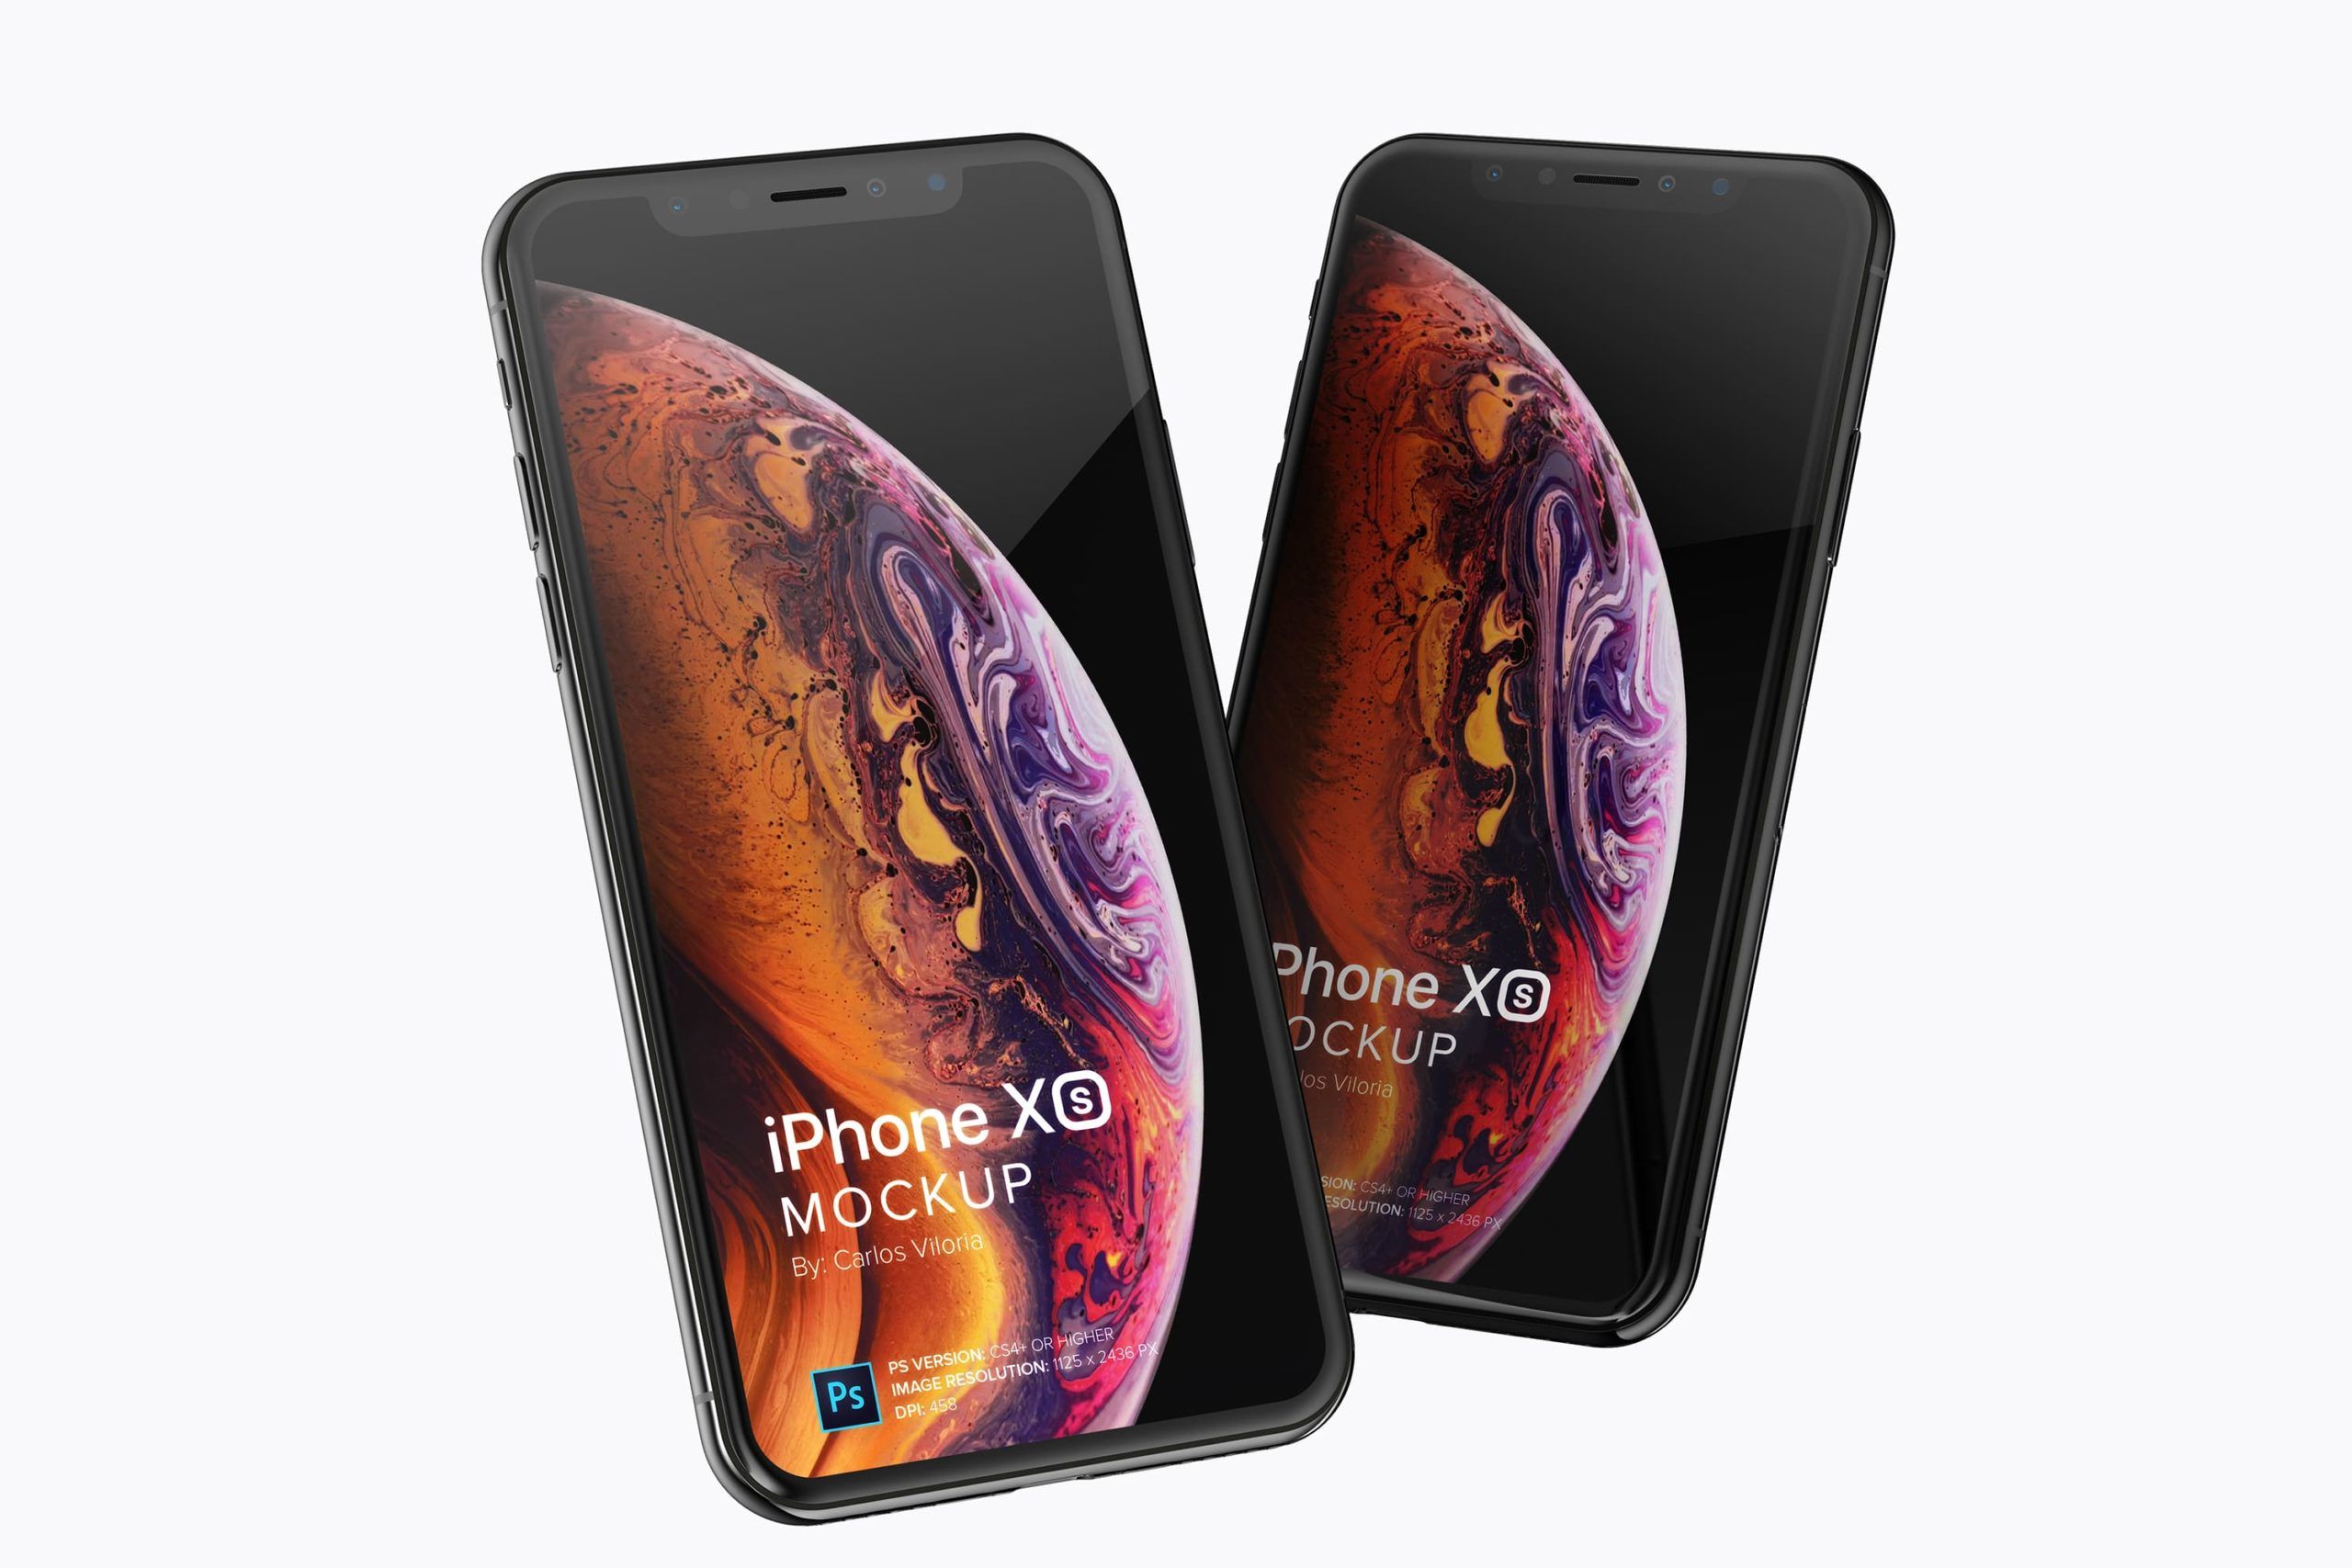 Iphone Xs Mockup for App and Ui Design